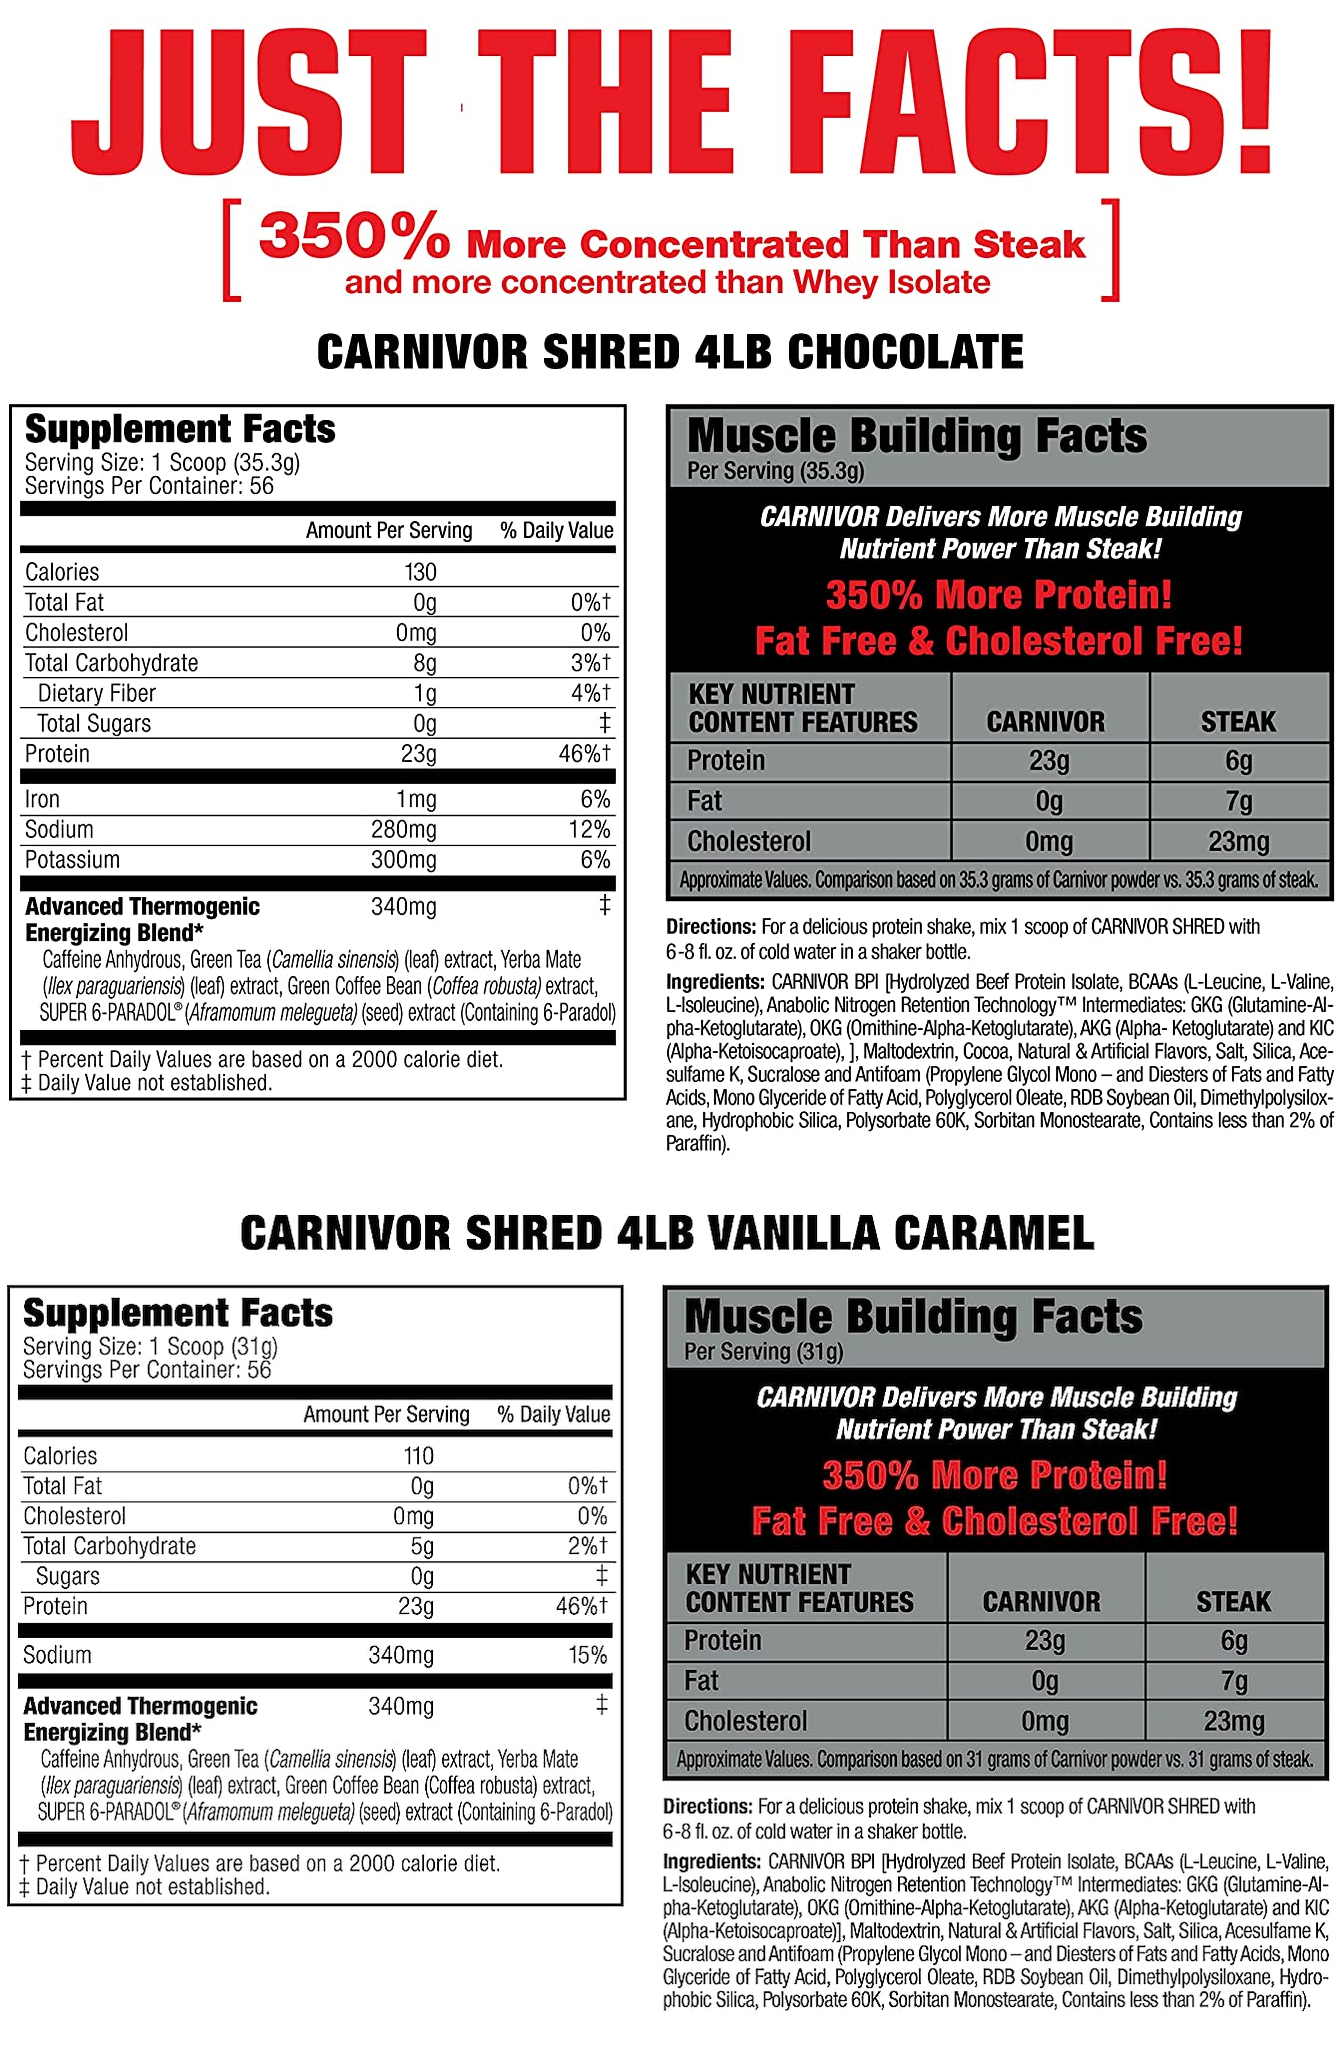 Carnivor Shred supplement facts for 4LB Chocolate and Vanilla Caramel variants. Contains 23g protein per scoop, plus thermogenic blend. 350% more protein than steak.